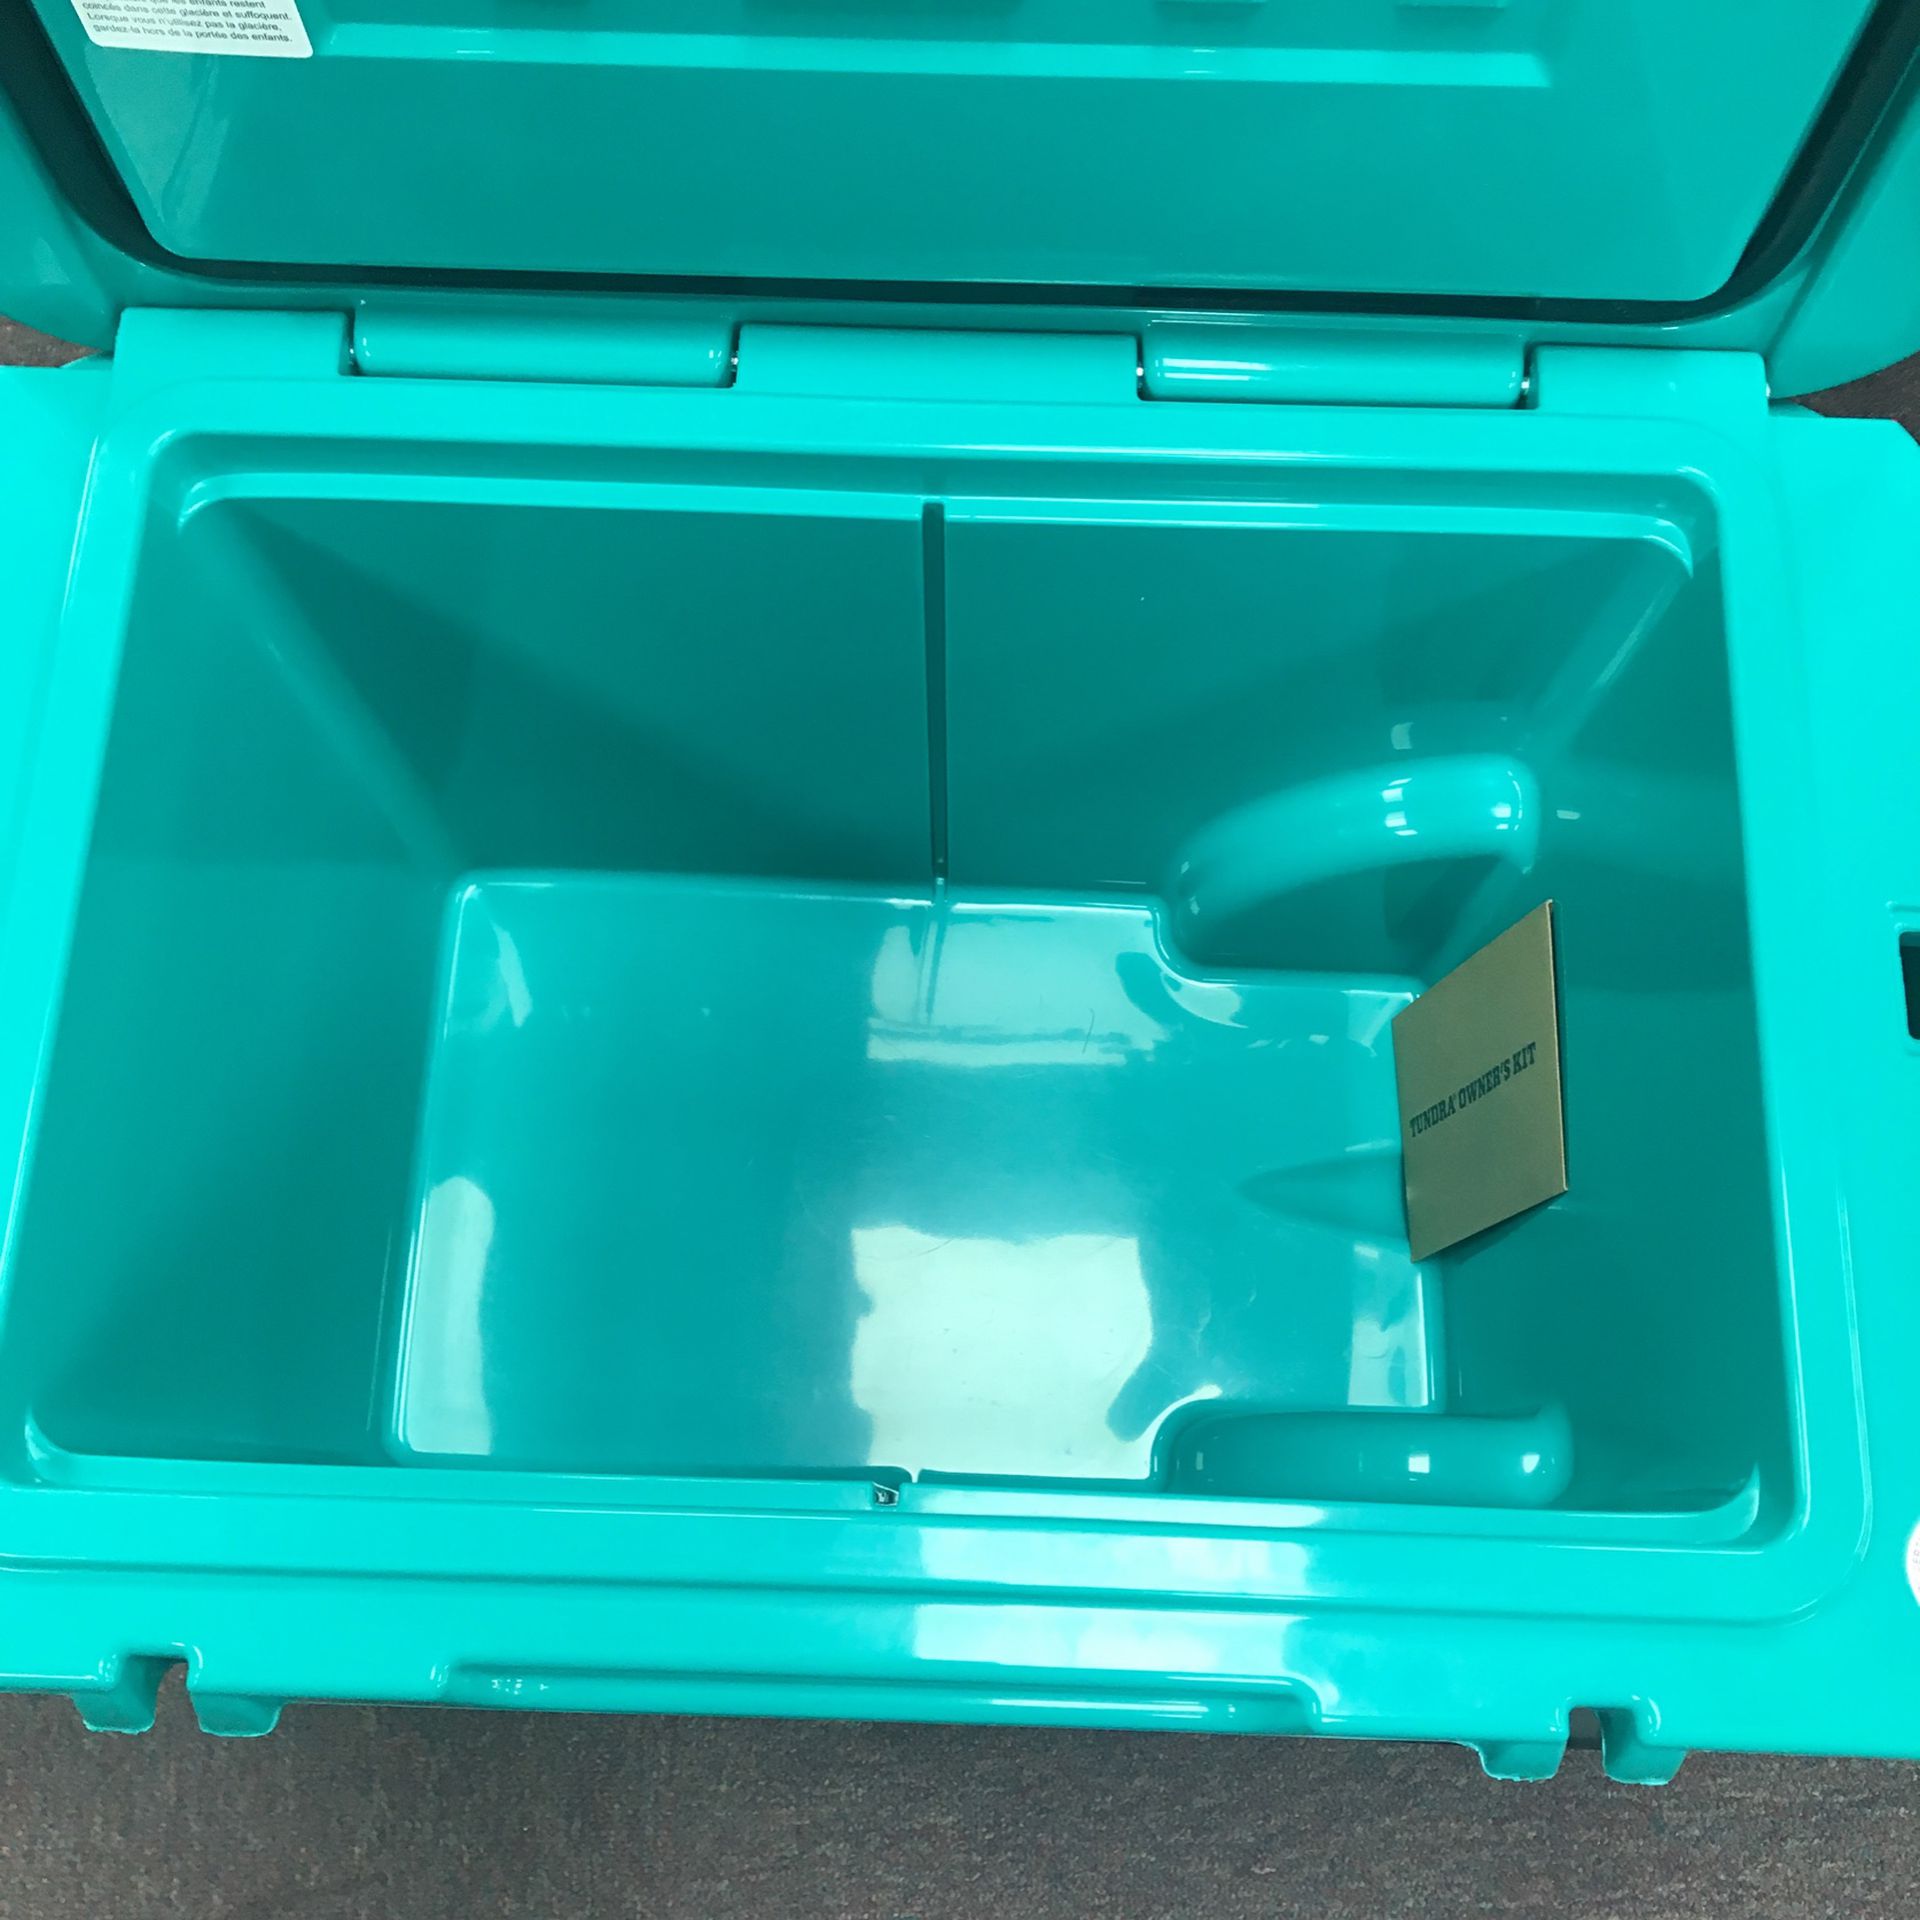 Yeti Chartreuse Tundra 35 for Sale in Avondale, AZ - OfferUp